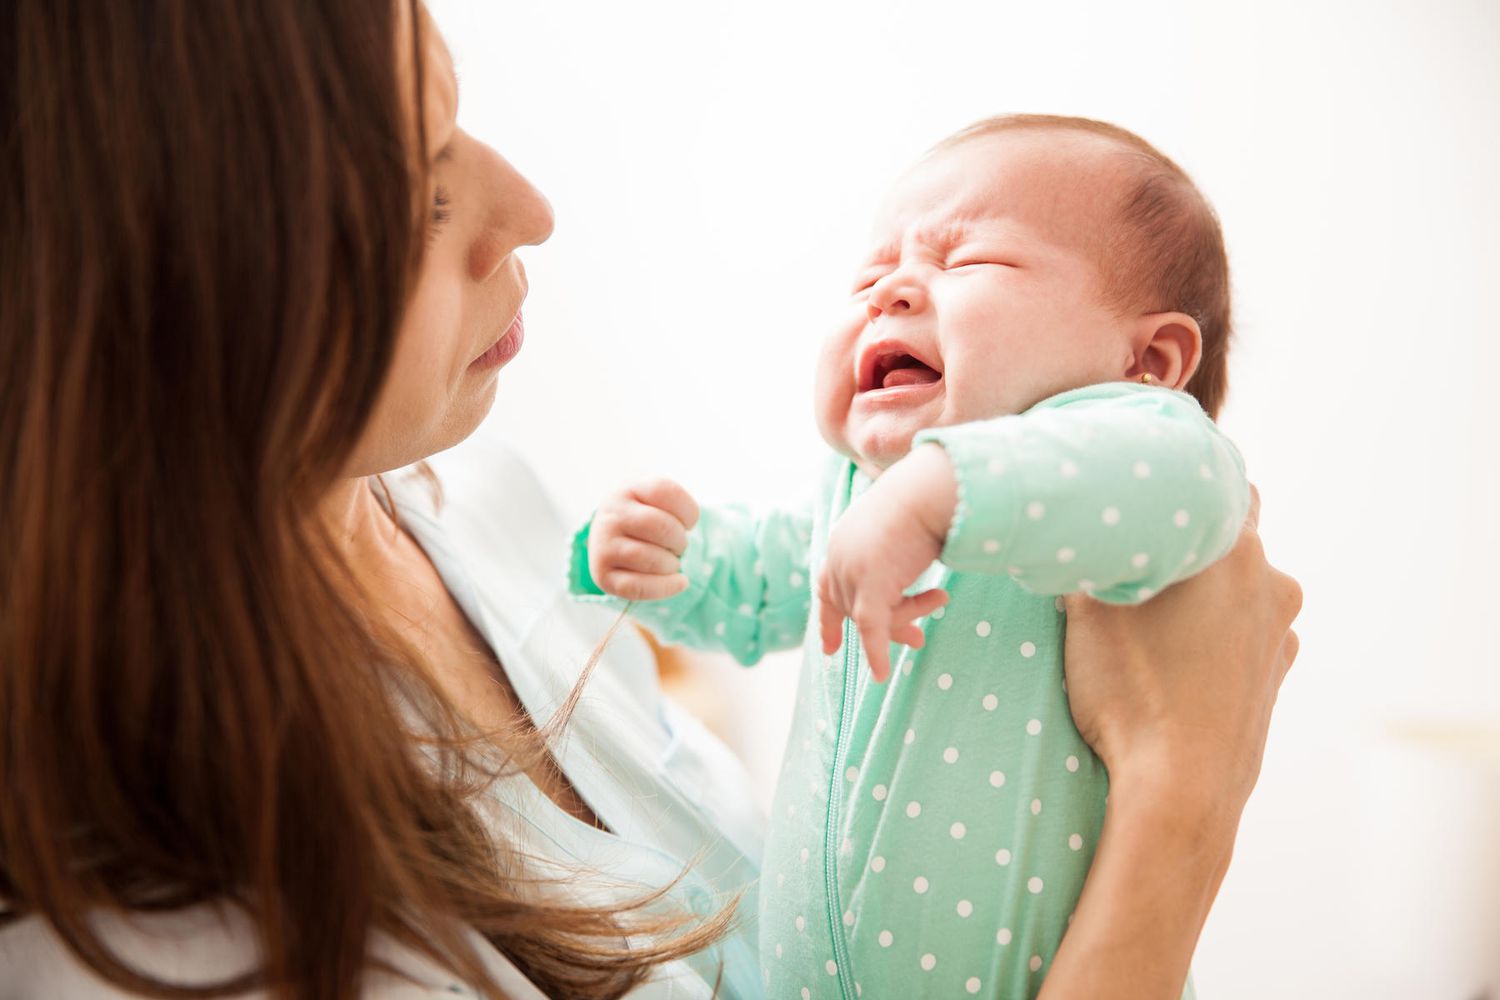 Babies cry a lot &ndash; that's how they communicate!